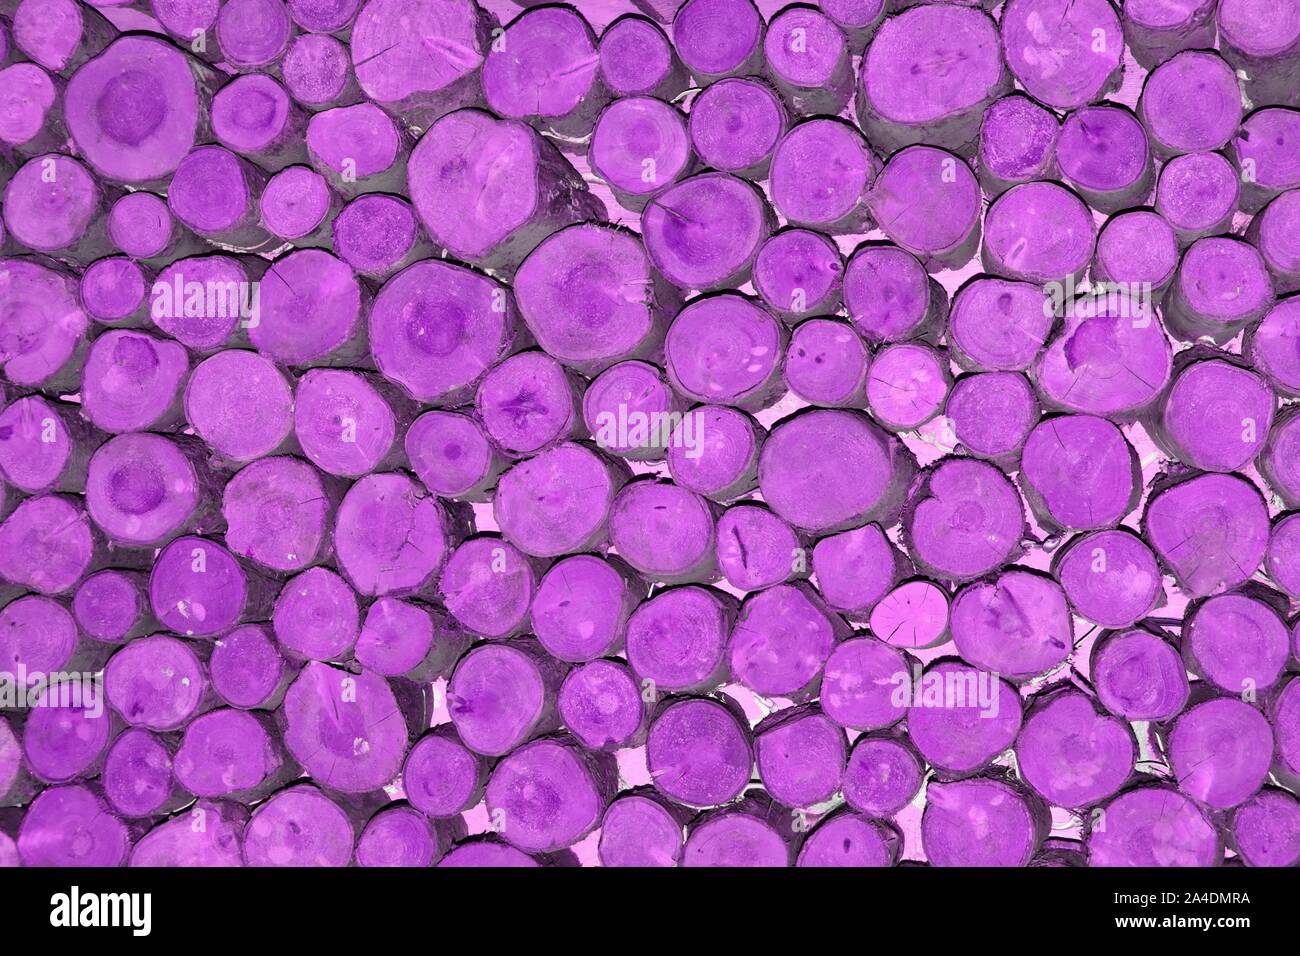 Abstract background pattern image manipulated purple colour applied to ends stacked short lengths of random diameter round sawn timber logs England UK Stock Photo